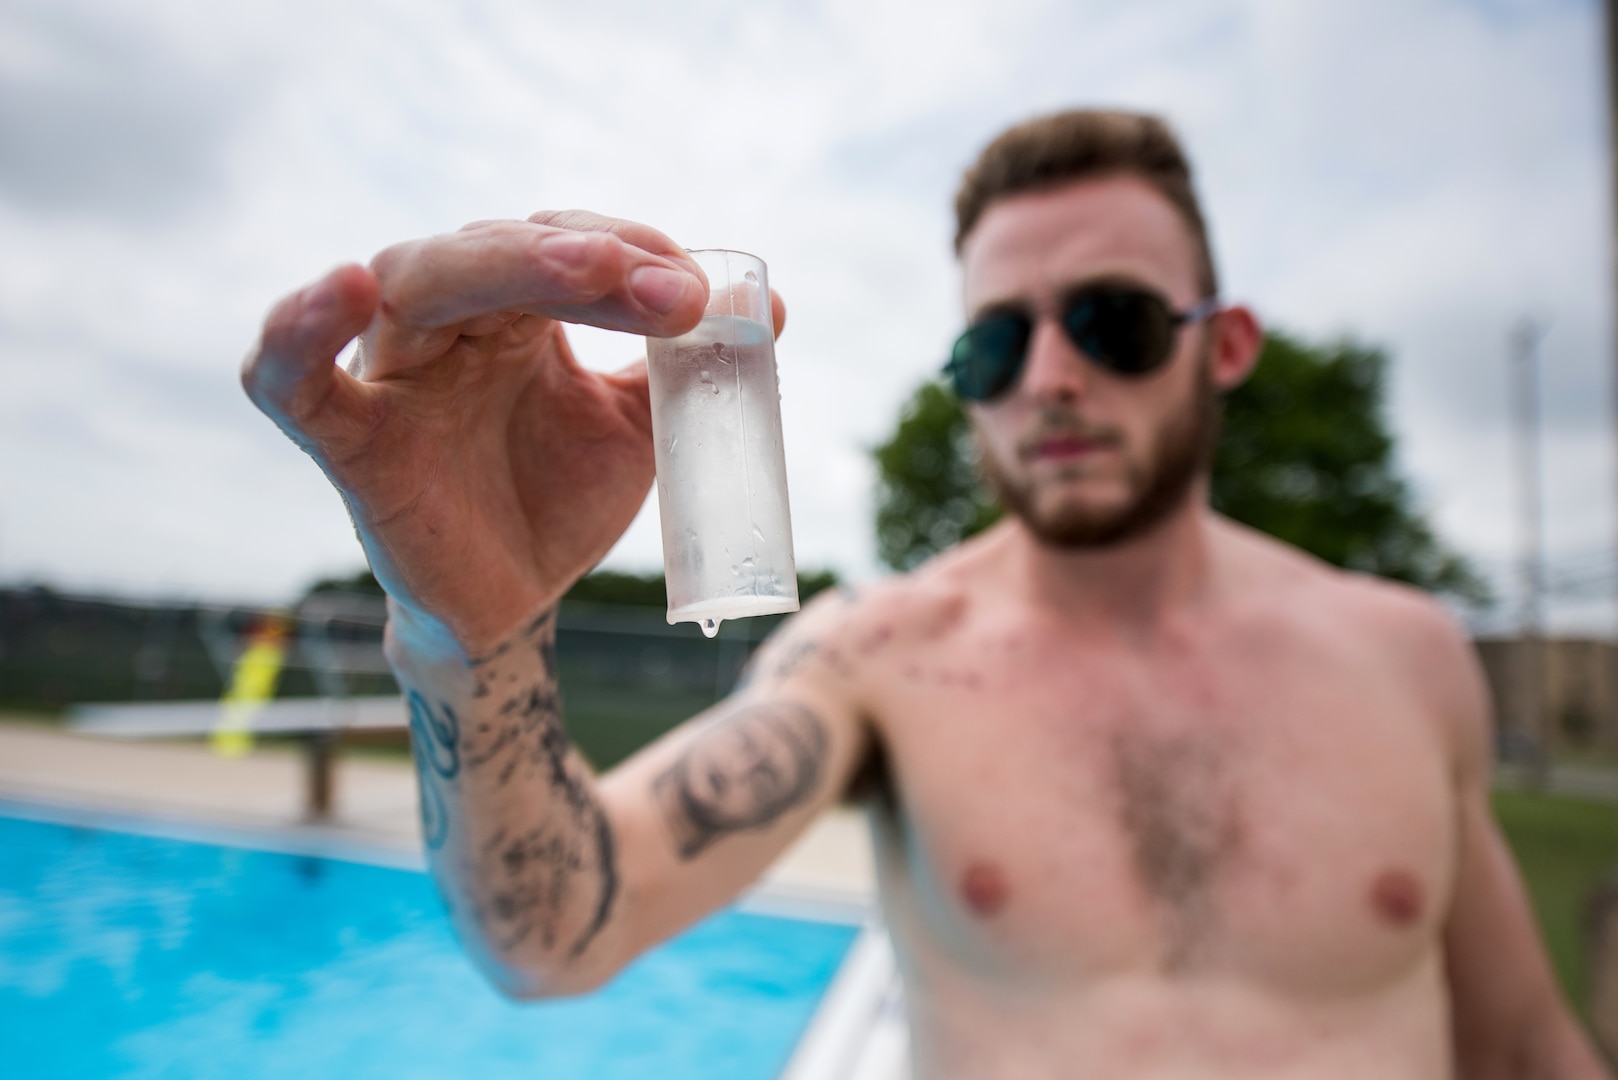 Bailey Parker, 502nd Force Support Squadron lifeguard, takes a water sample before opening the Warhawk pool, June 21, 2019, at Joint Base San Antonio-Lackland, Texas.